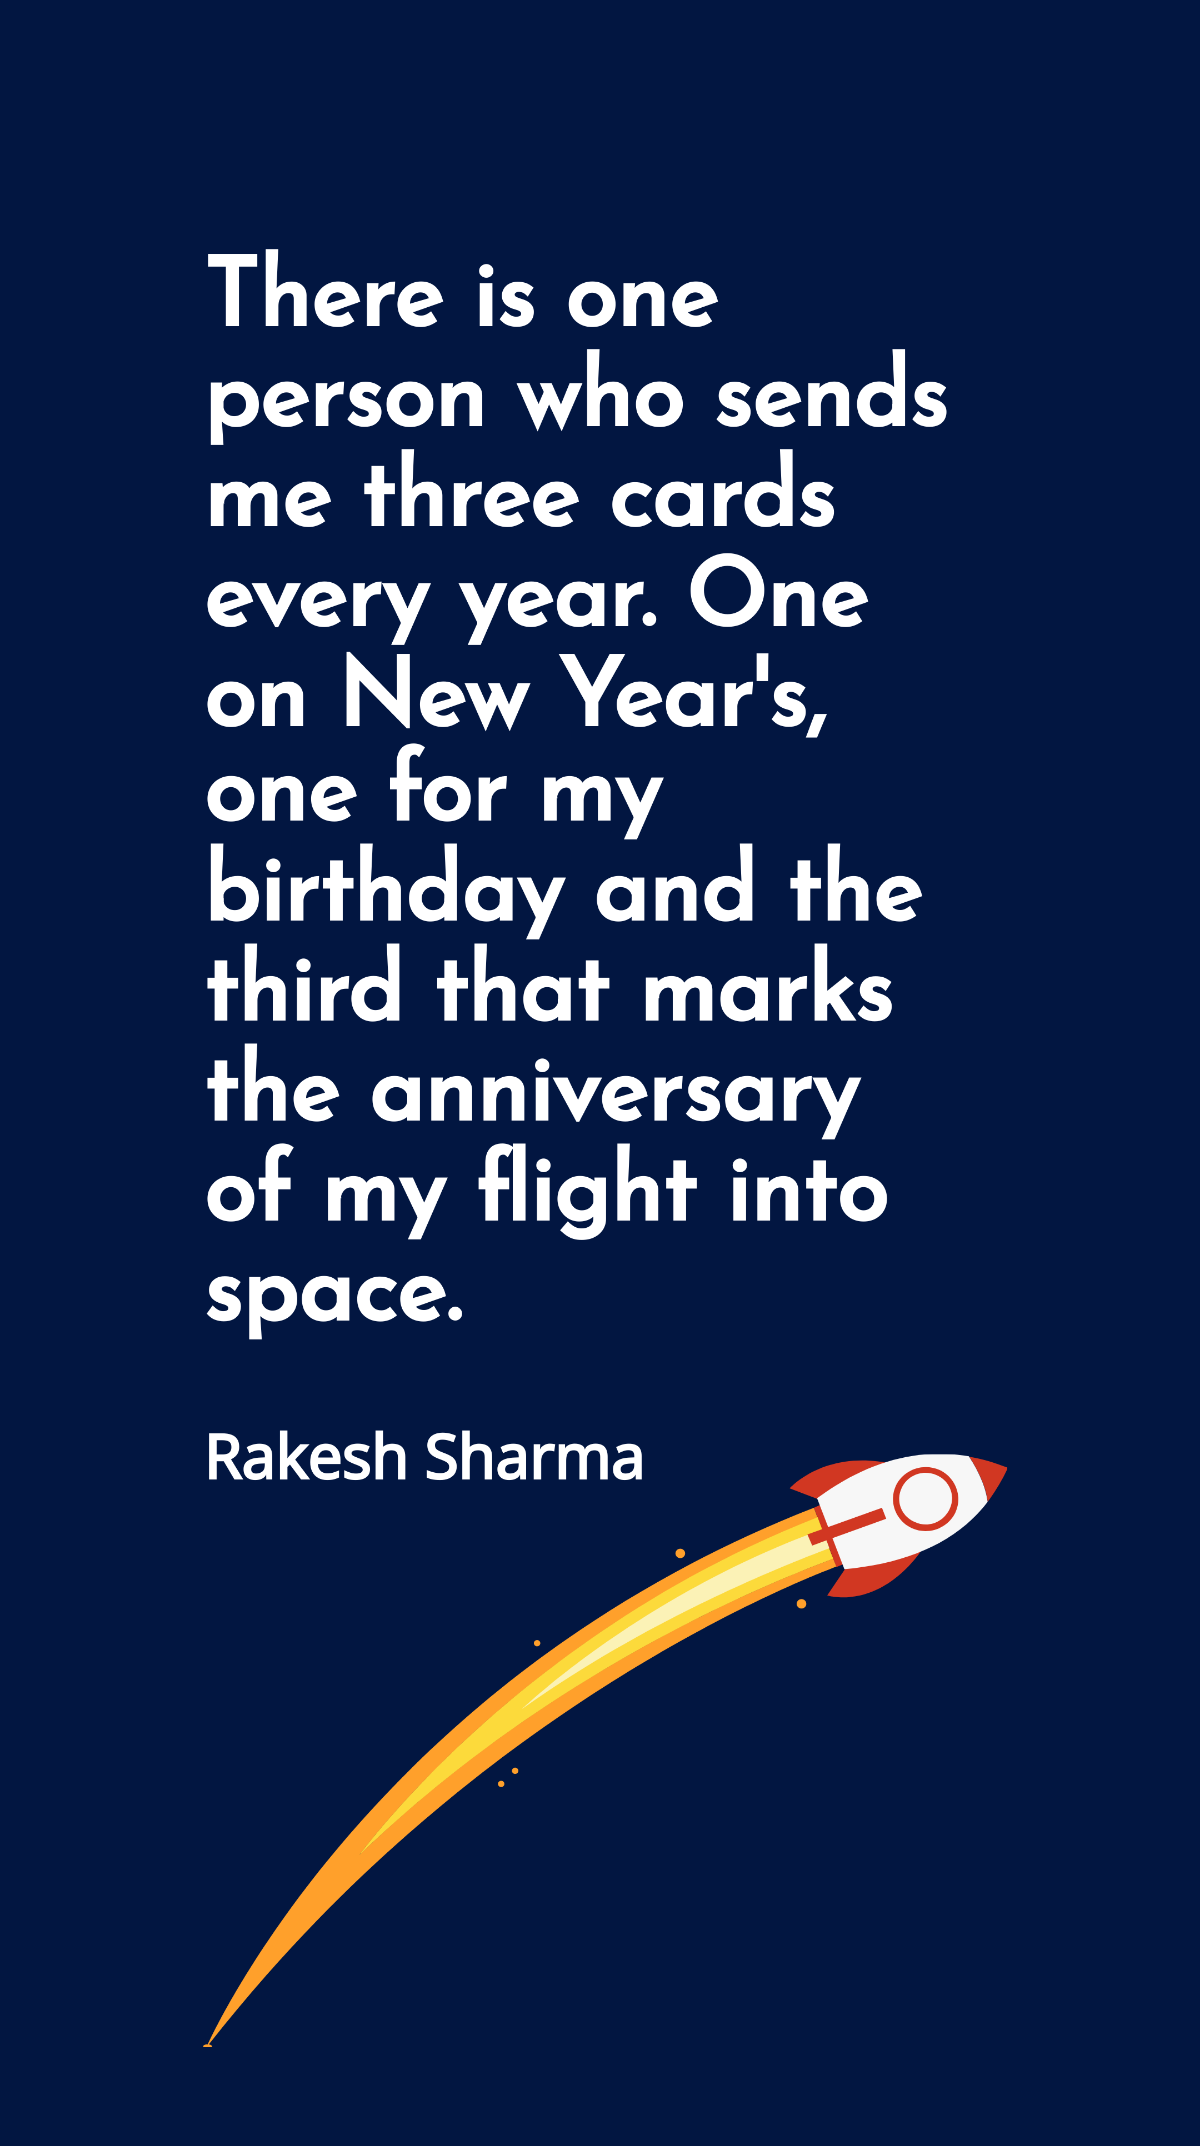 Rakesh Sharma - There is one person who sends me three cards every year. One on New Year's, one for my birthday and the third that marks the anniversary of my flight into space.